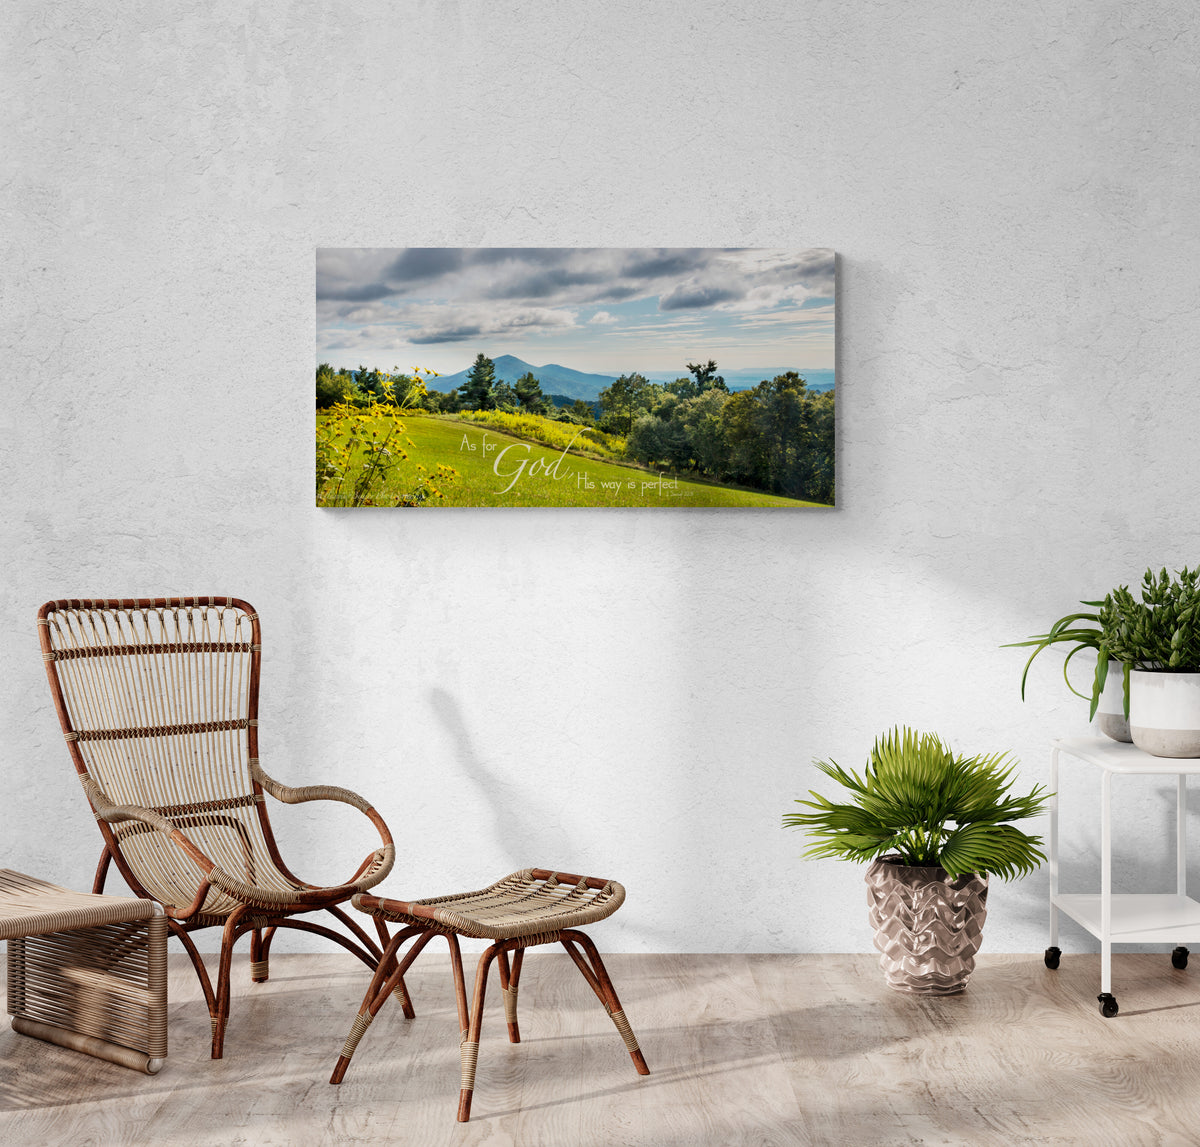 print displayed on wall in living room